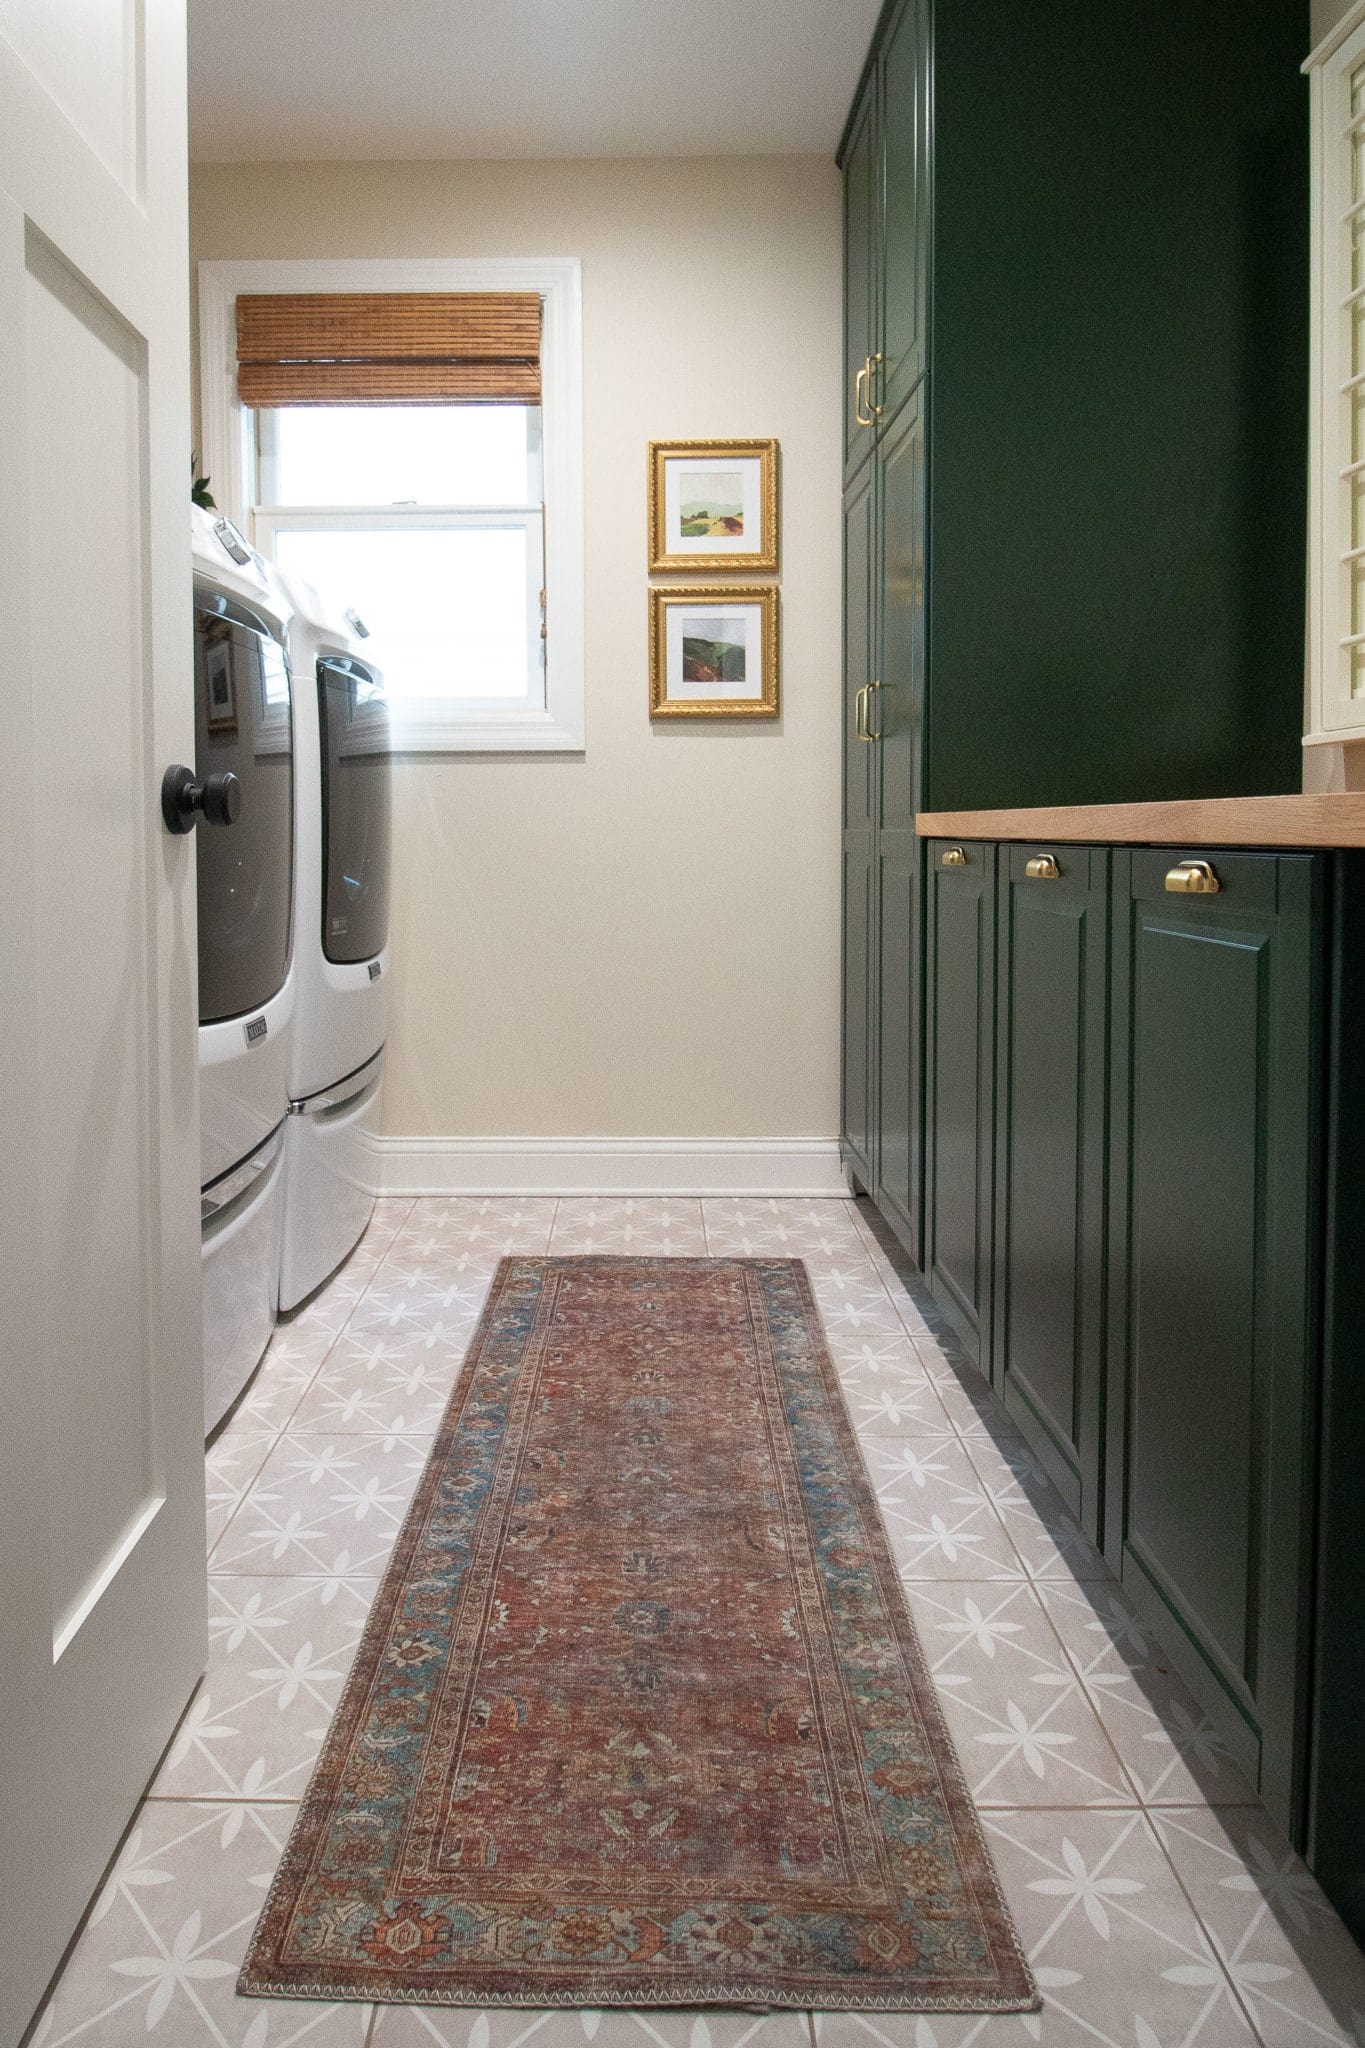 Our DIY laundry room makeover